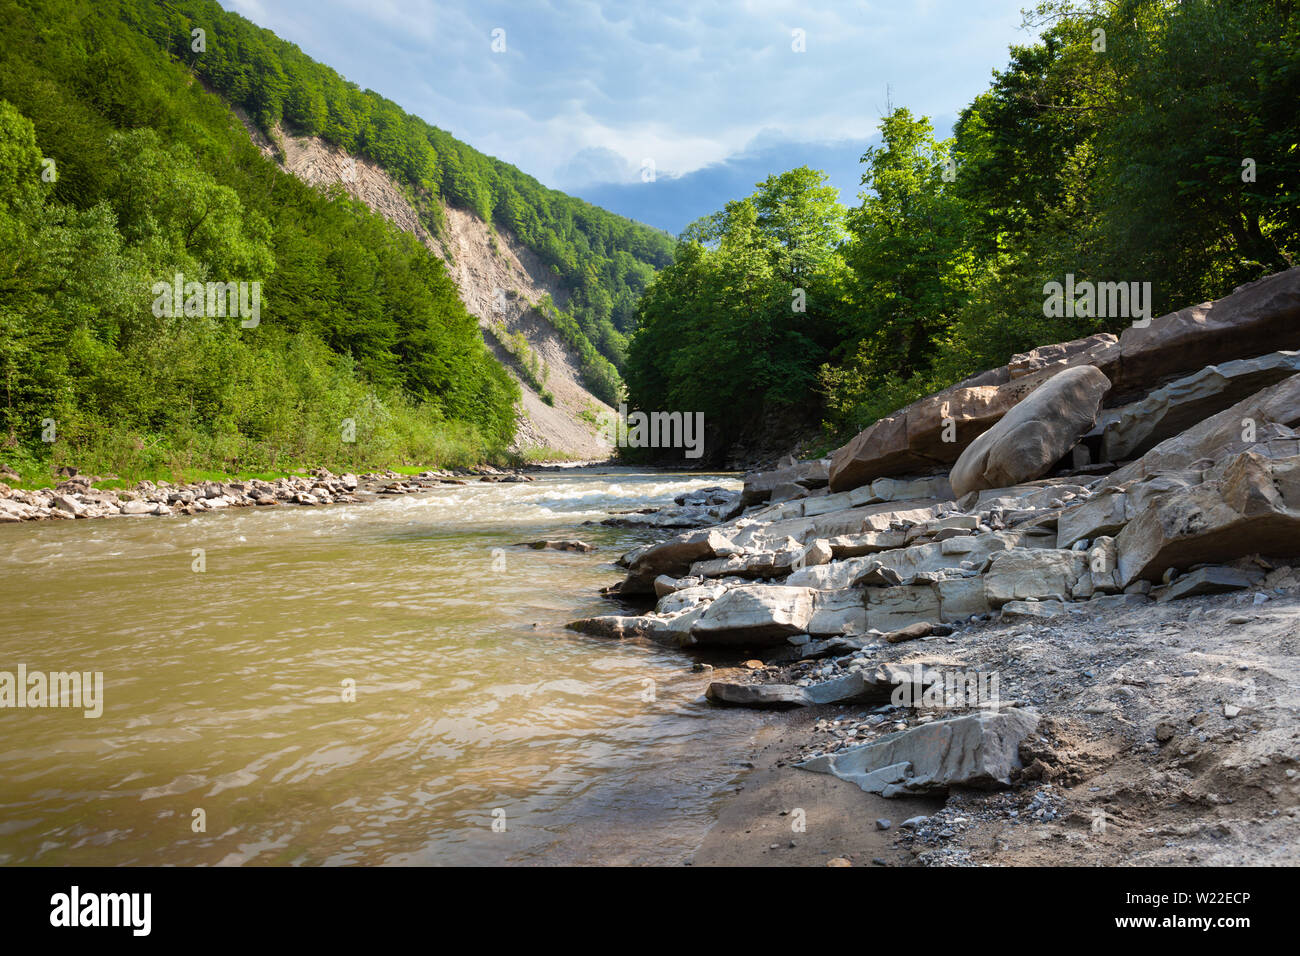 Beautiful landscape of the Carpathian mountains, forest,rocks and stones near fast river Prut in Yaremche town, Ukraine Stock Photo